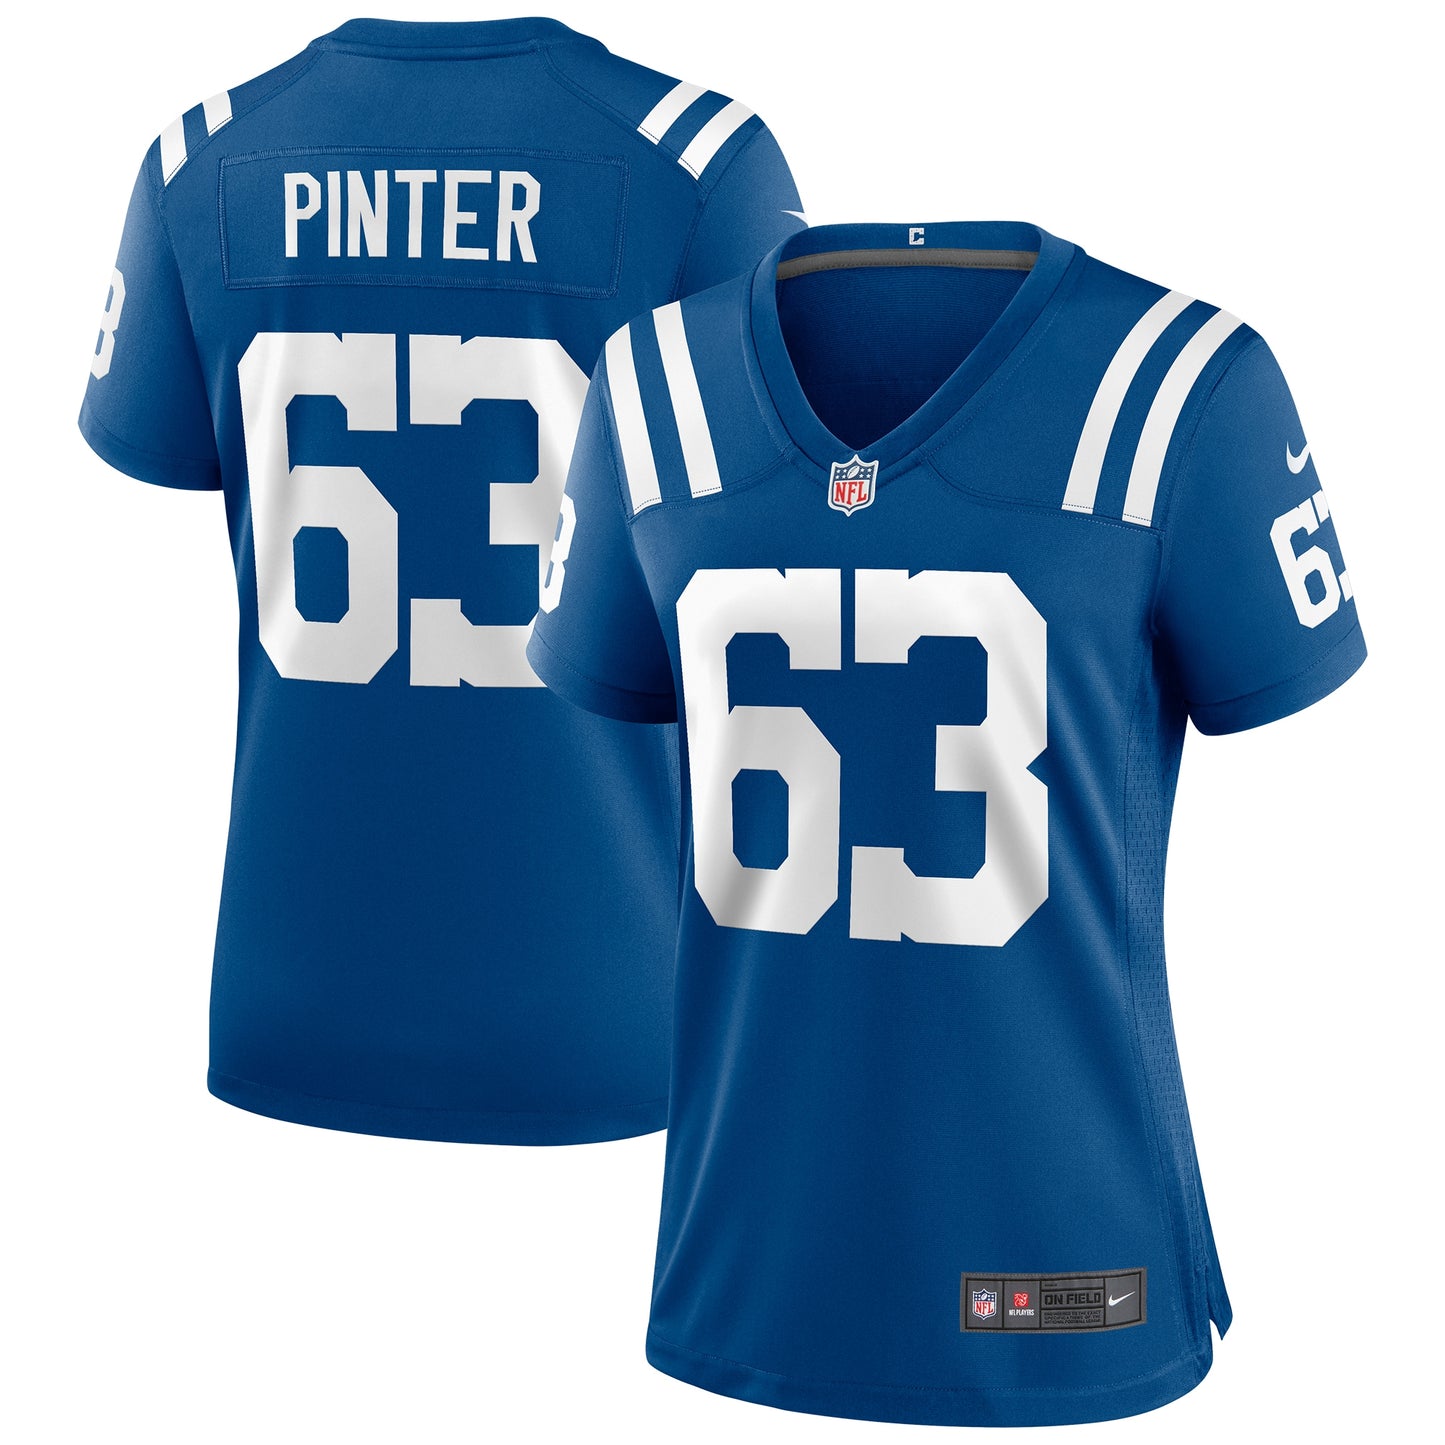 Danny Pinter Indianapolis Colts Nike Women's Game Jersey - Royal